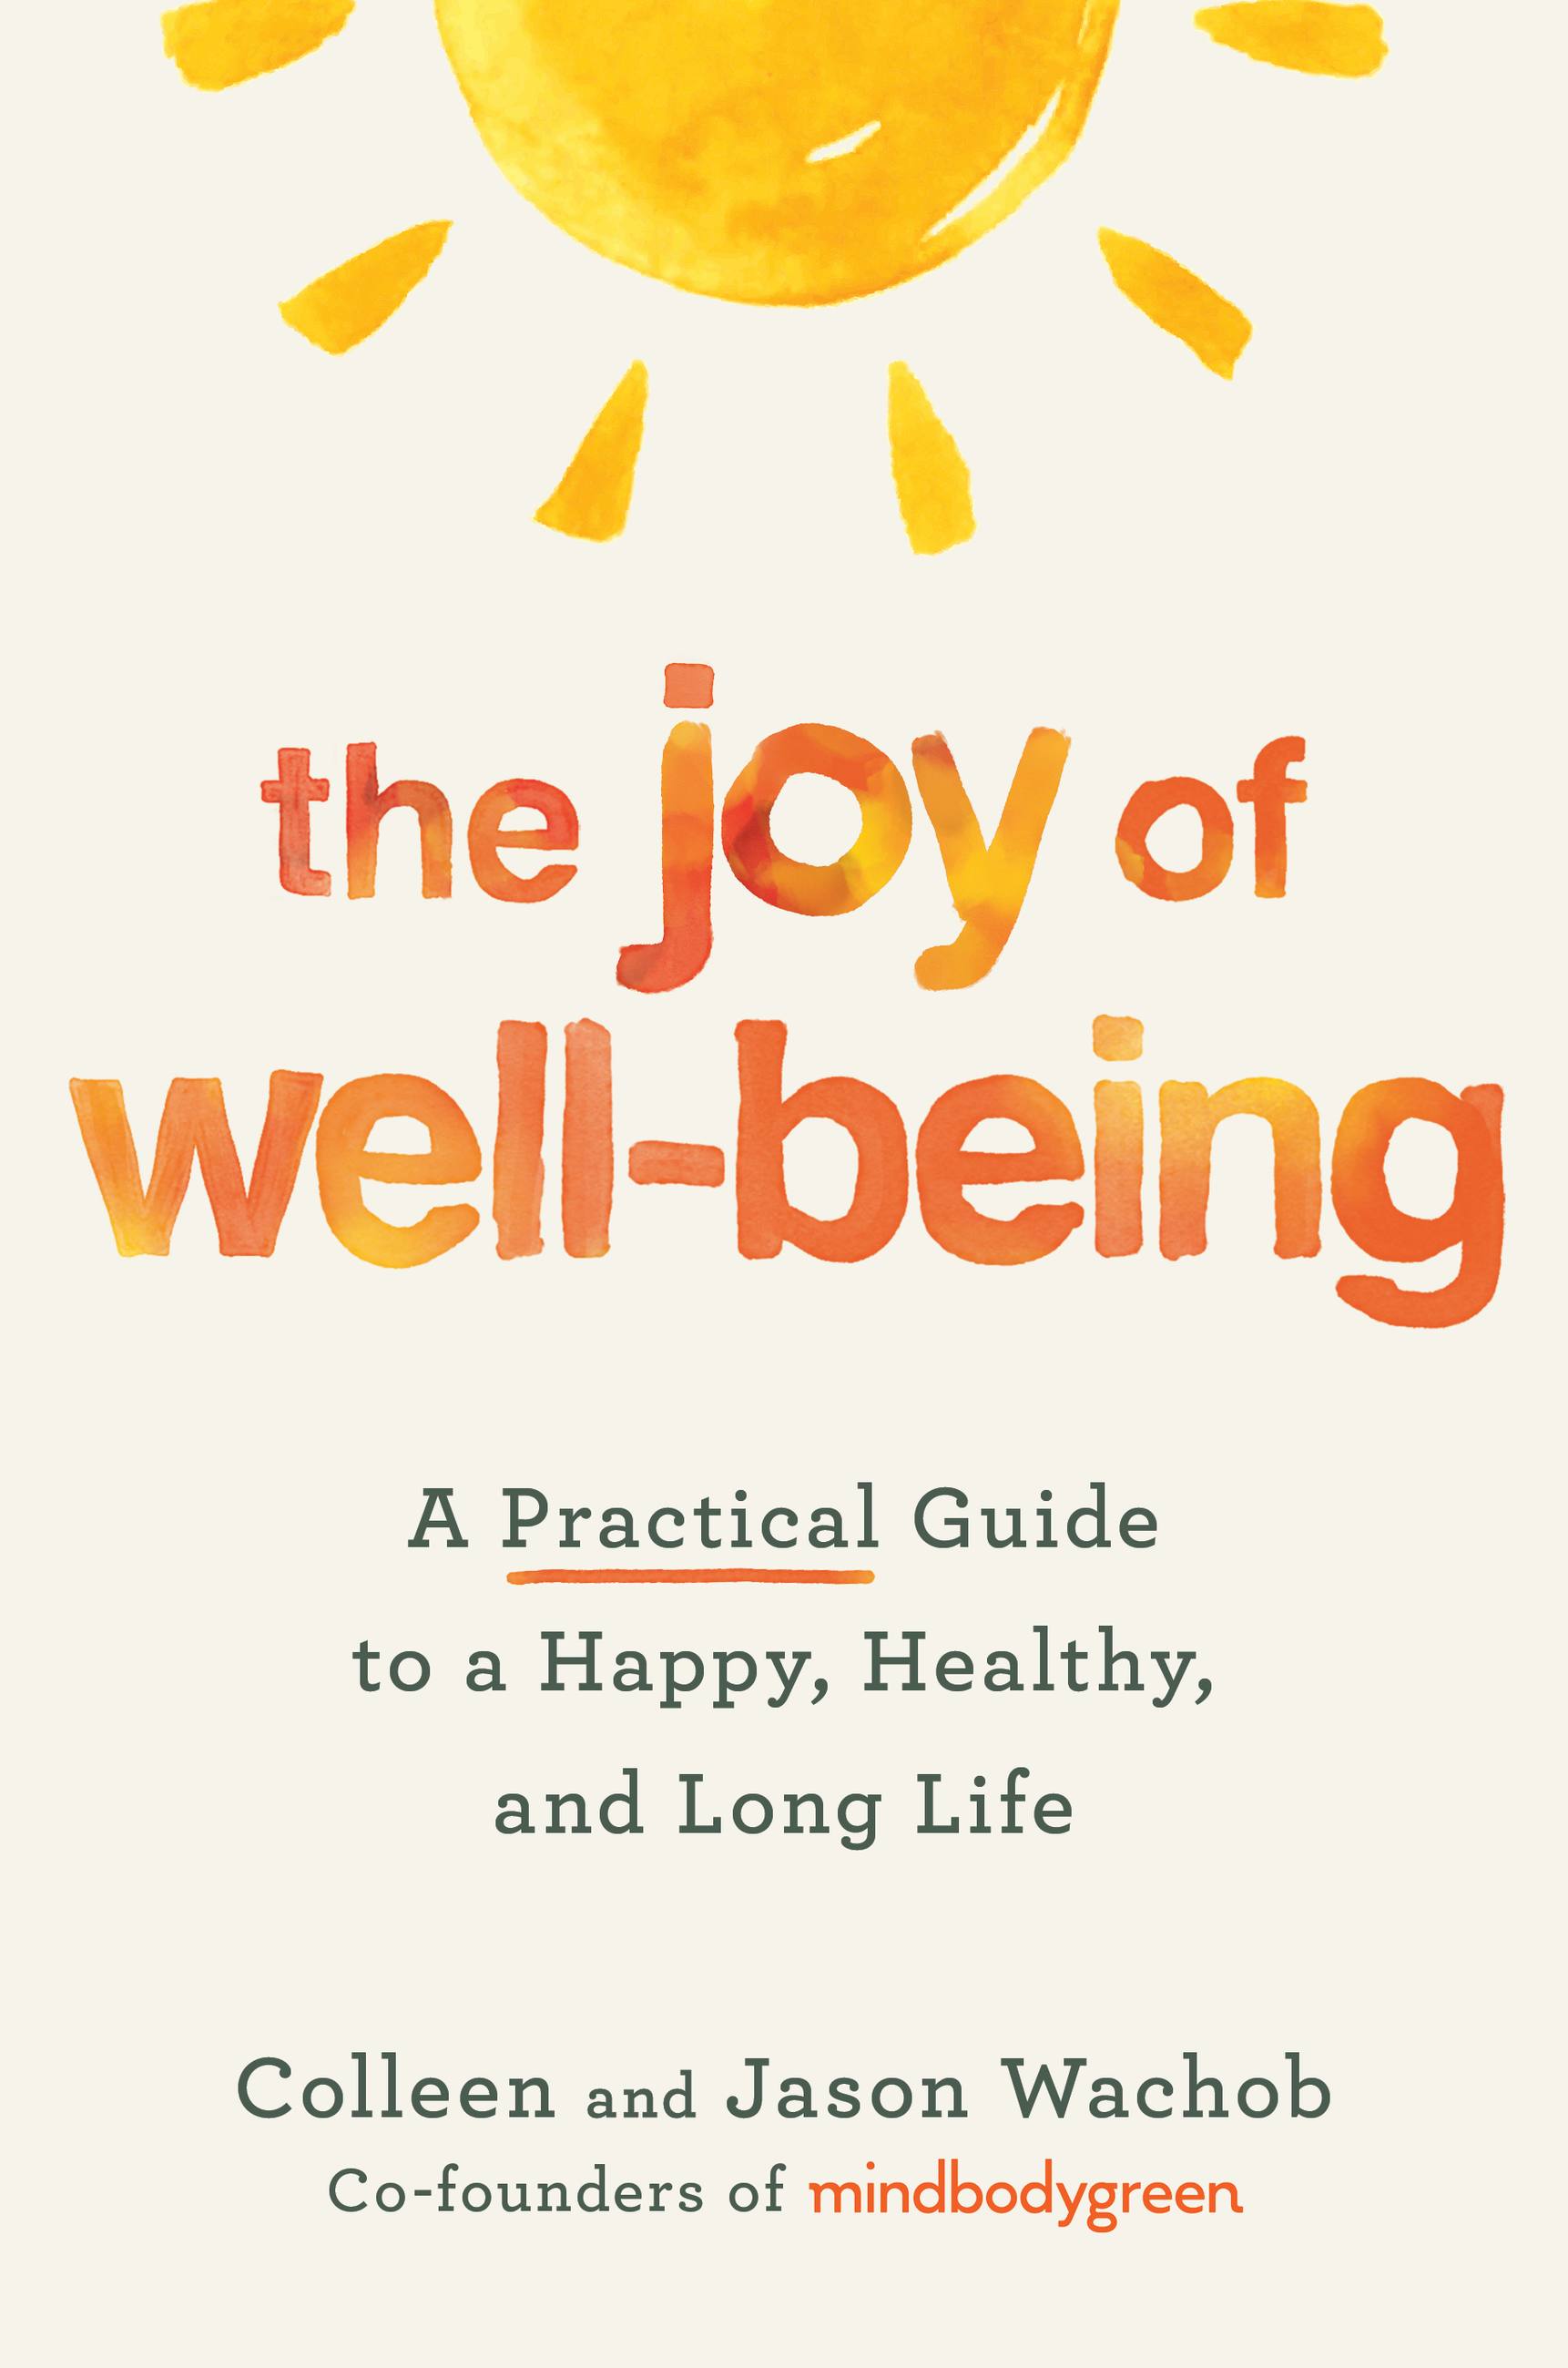 The Joy of Well-Being by Colleen and Jacob Wachob